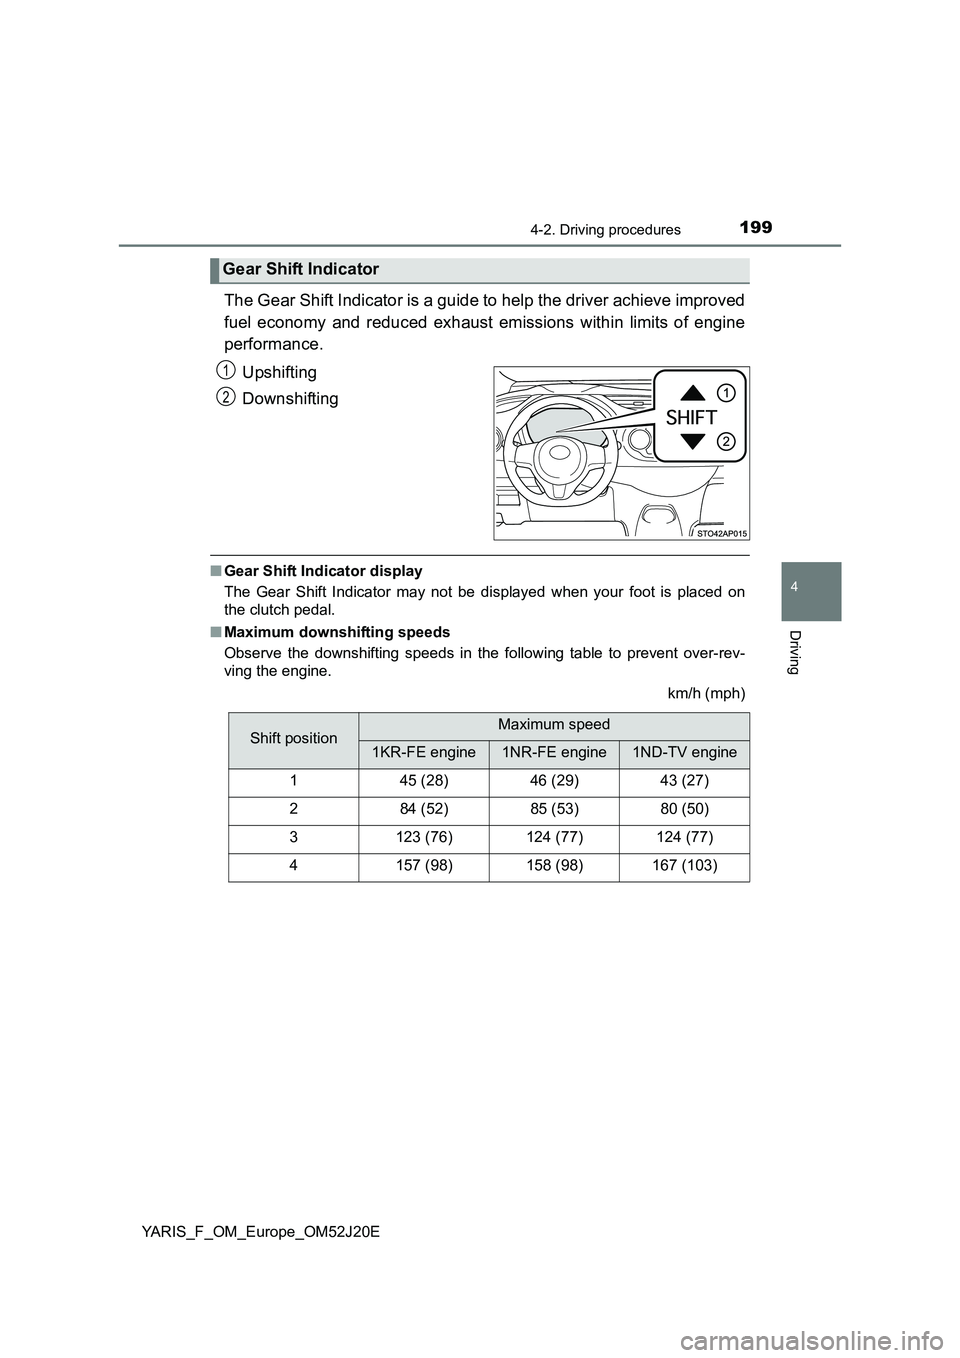 TOYOTA YARIS 2017  Owners Manual 1994-2. Driving procedures
4
Driving
YARIS_F_OM_Europe_OM52J20E
The Gear Shift Indicator is a guide to help the driver achieve improved 
fuel economy and reduced exhaust emissions within limits of eng